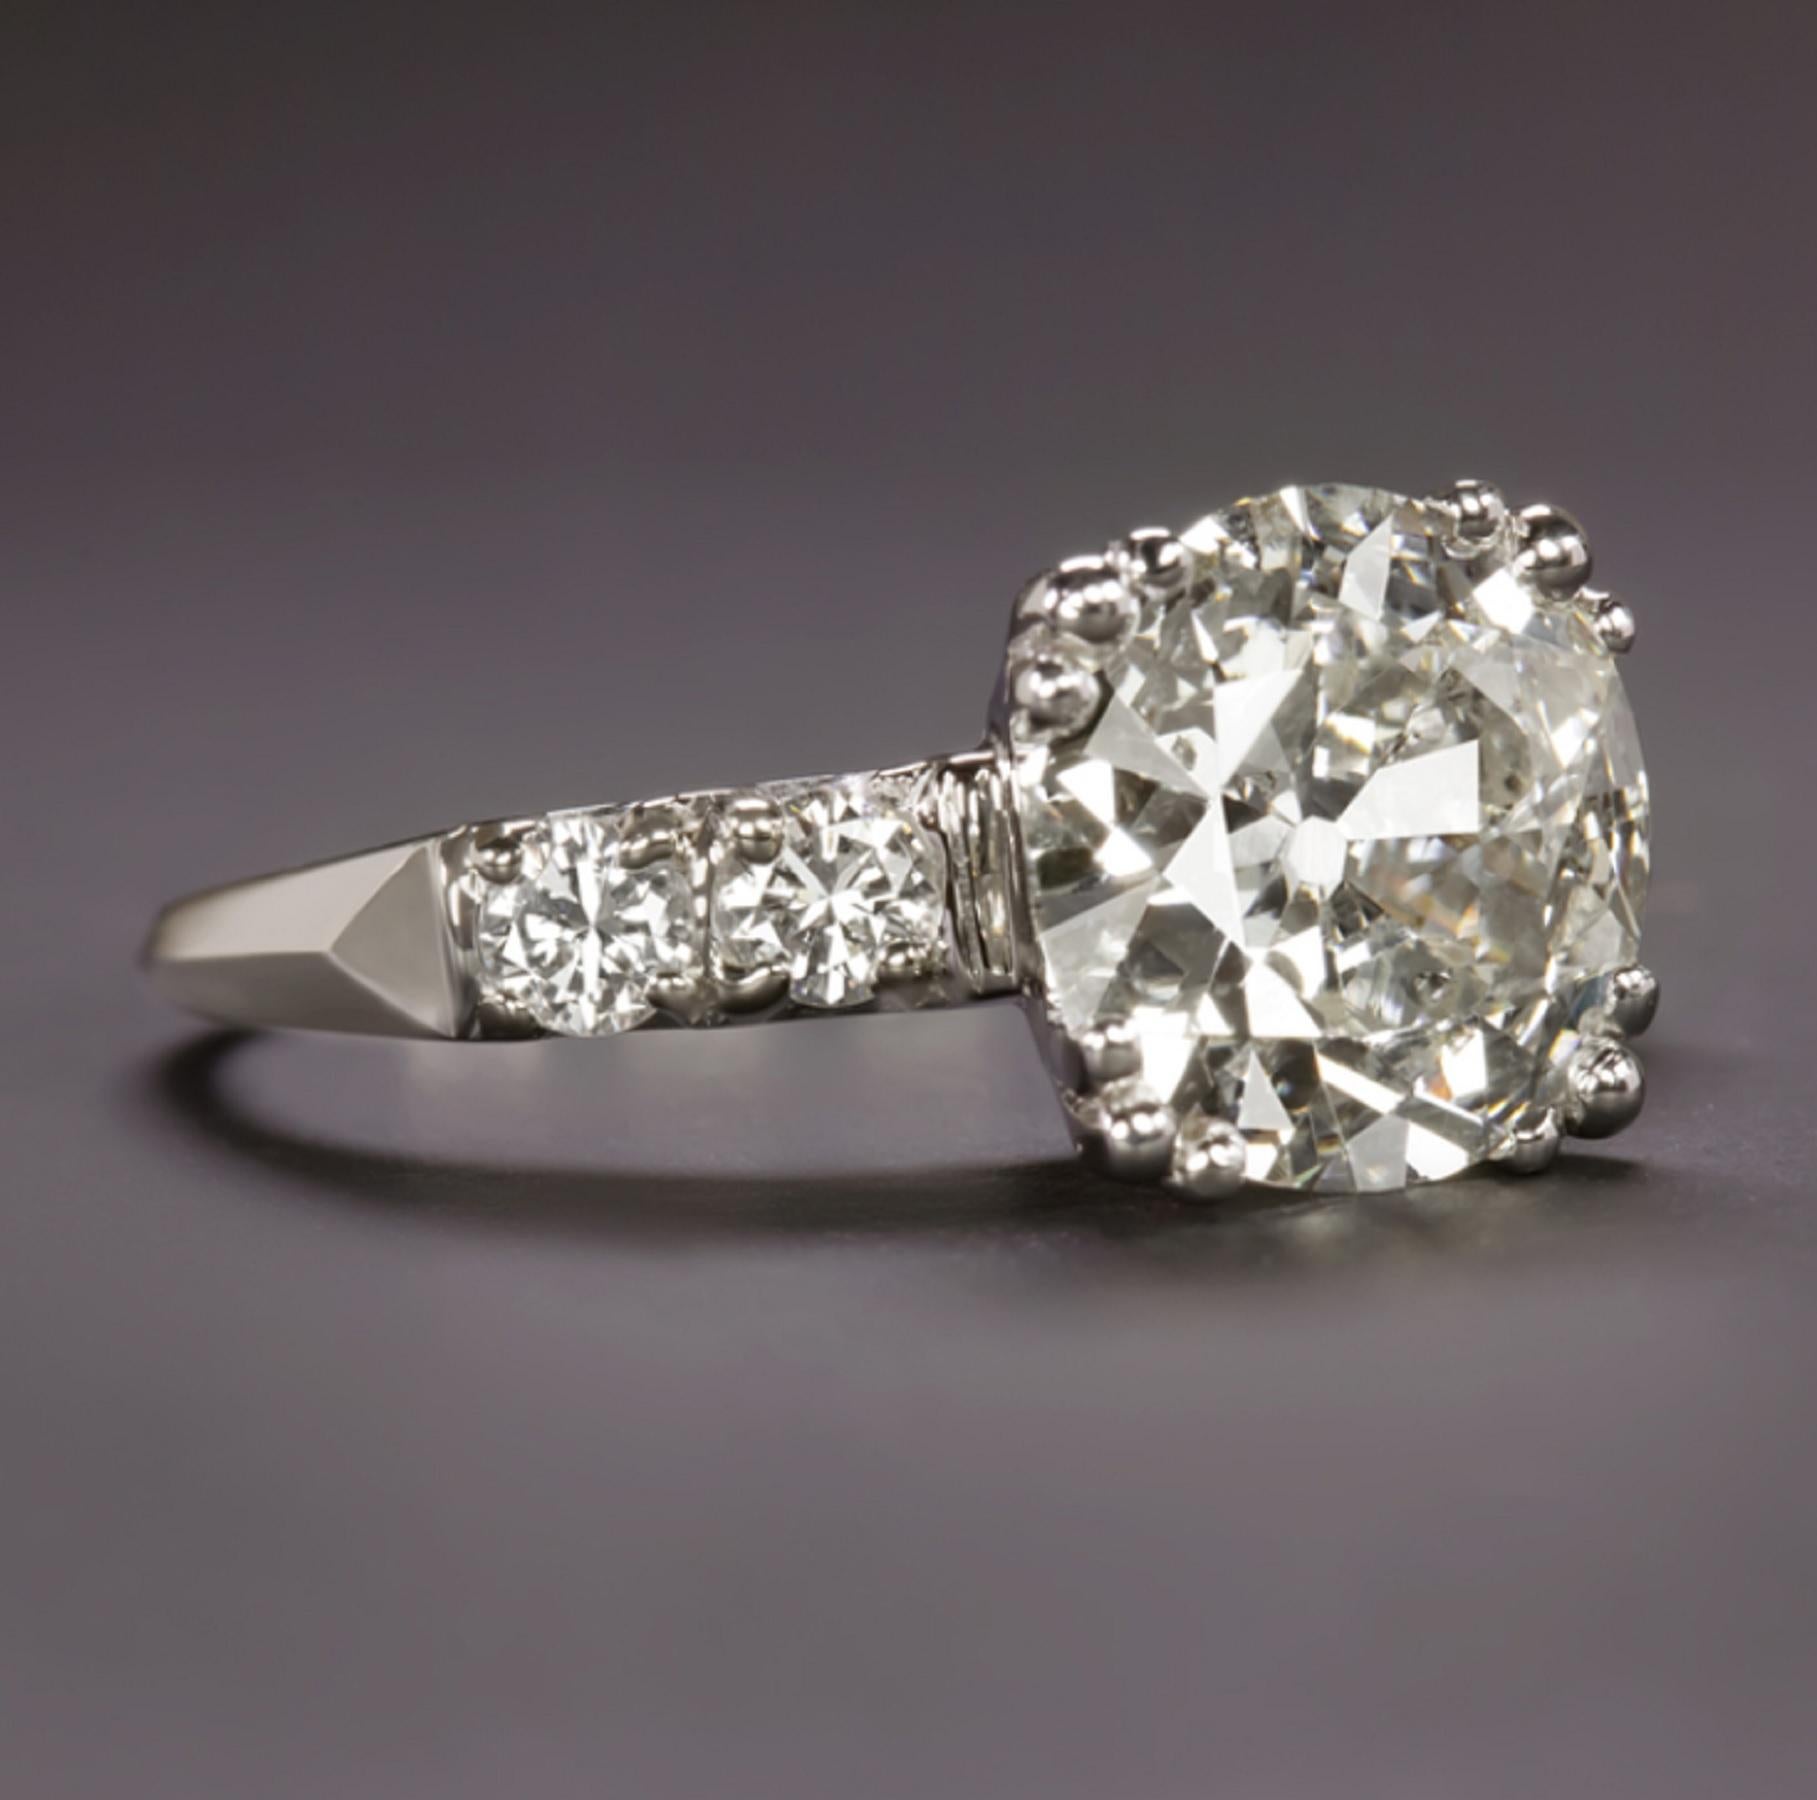 classic vintage engagement ring is dazzling with brilliant sparkle and beautifully crafted in solid platinum with simple yet elegant details. The 1.92ct old European cut certified diamond is impressive in size, beautifully white, eye clean, and